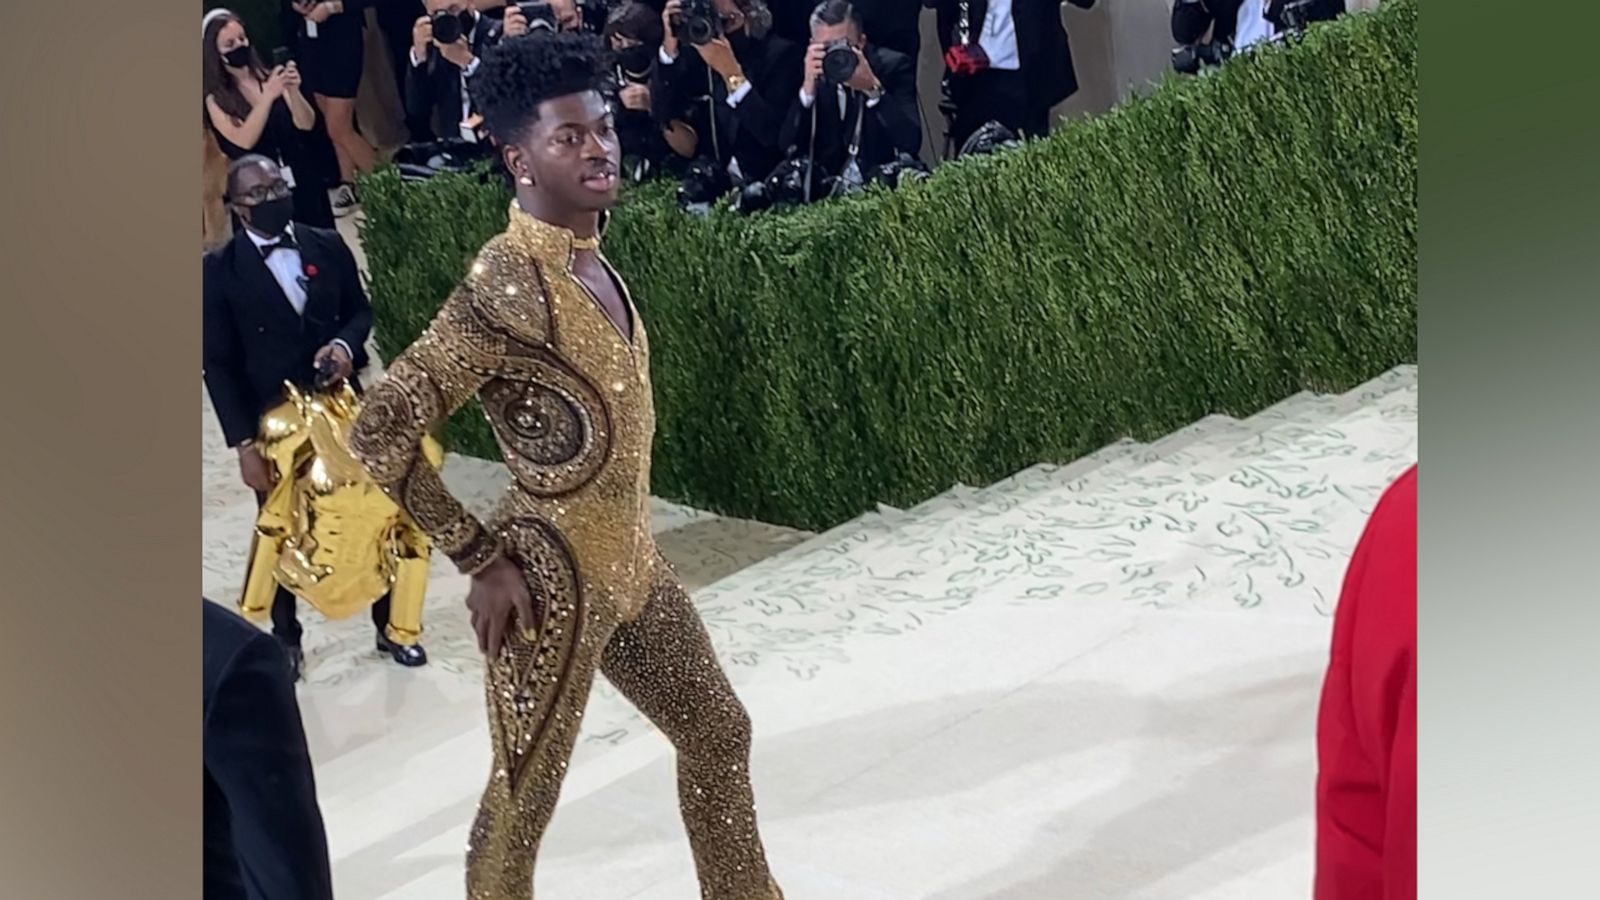 Watch Lil Nas X transform into his gold bodysuit at the MET Gala Good